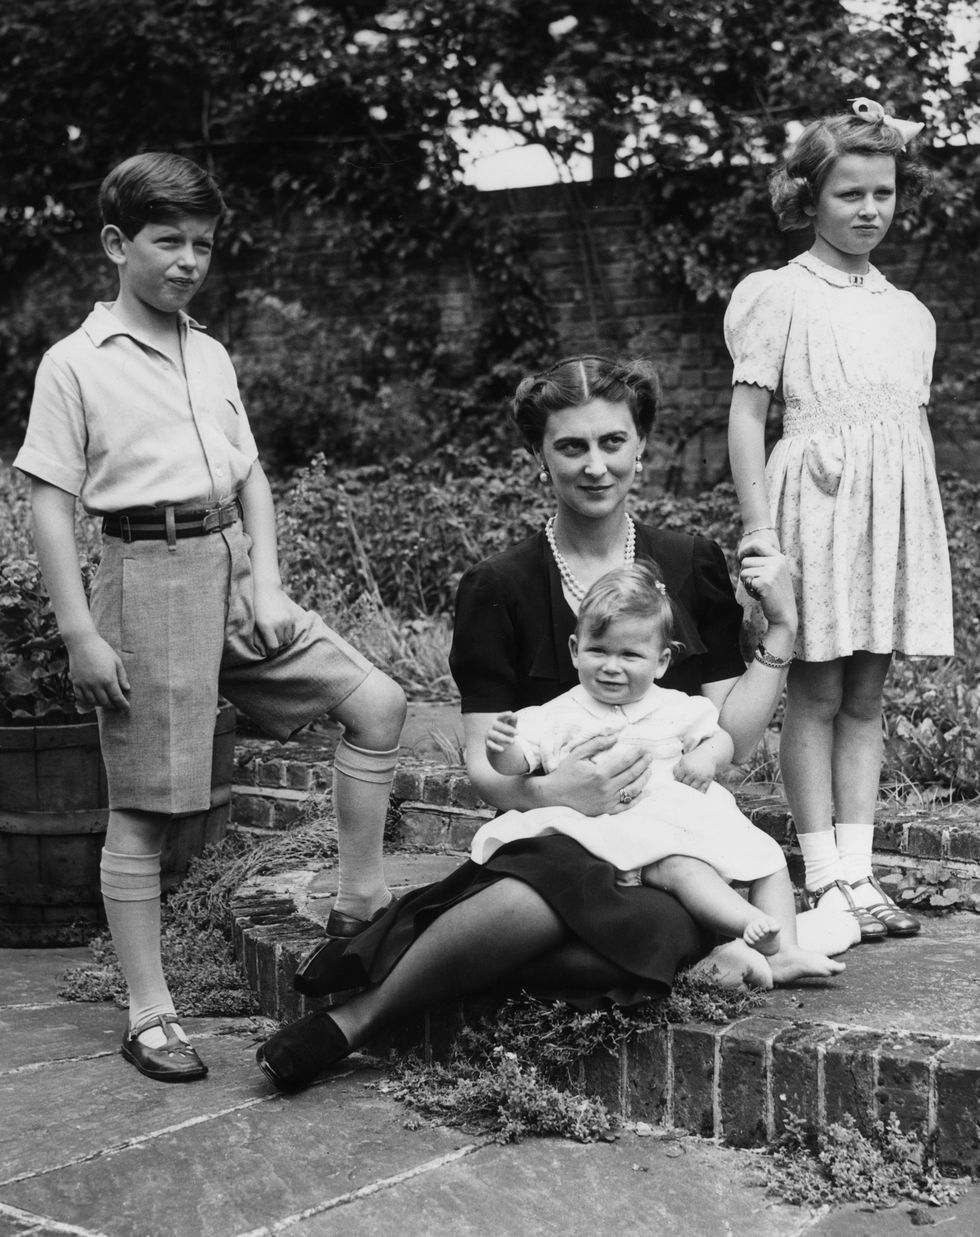 july 1943 marina, duchess of kent with her three children, prince edward later duke of kent, princess alexandra and prince michael on his first birthday, at coppins ivor, buckinghamshire photo by central pressgetty images